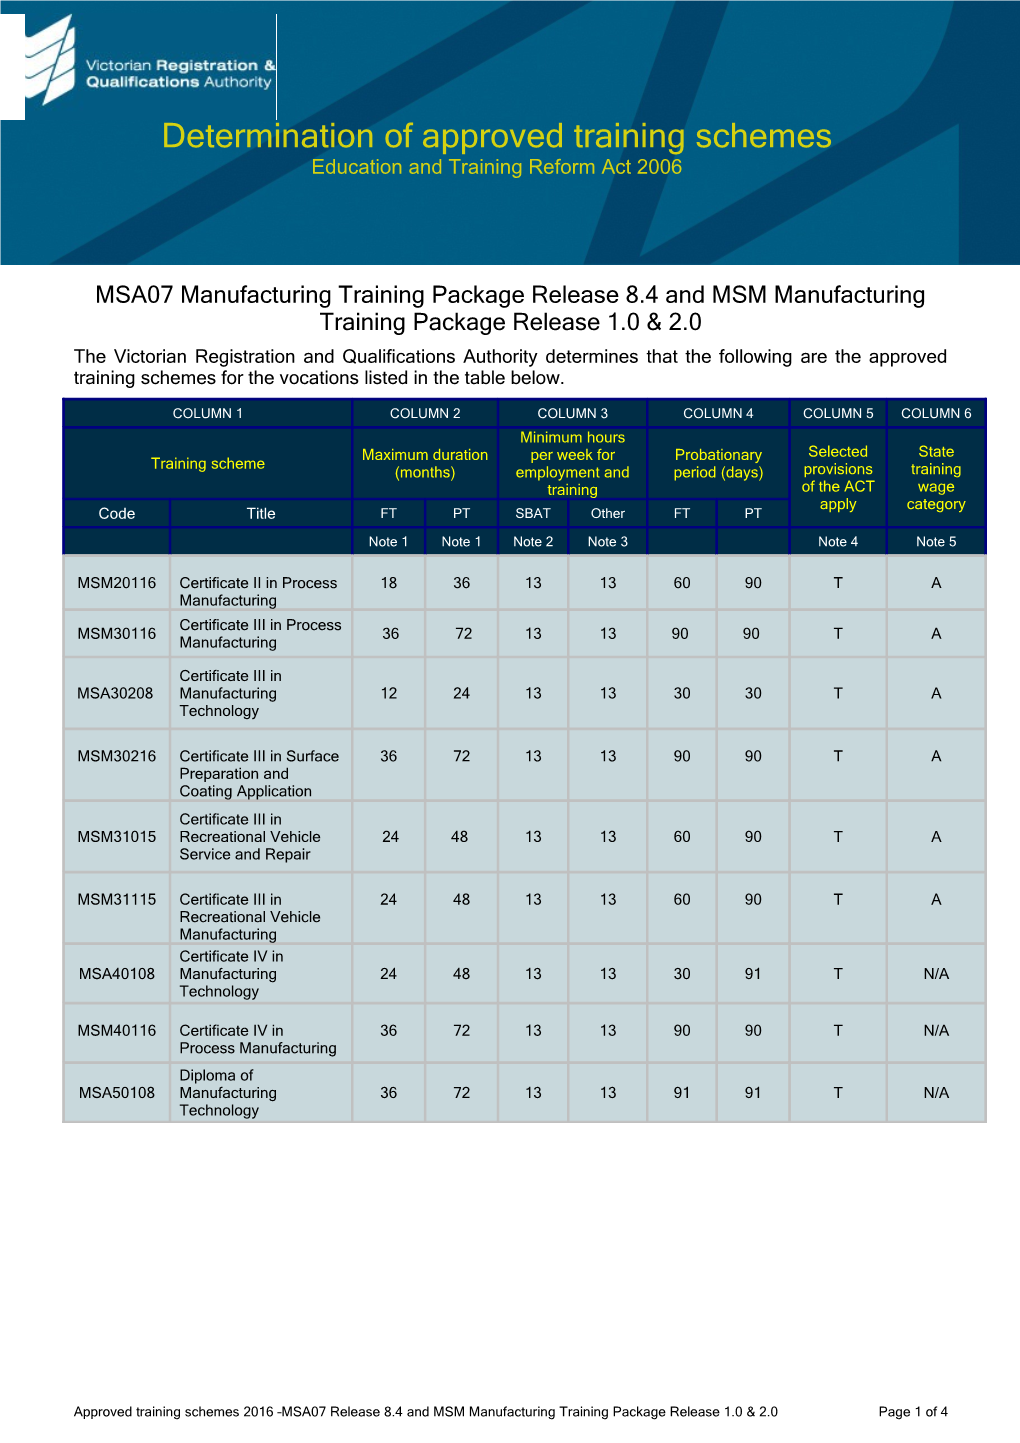 MSA07 Manufacturing Training Package